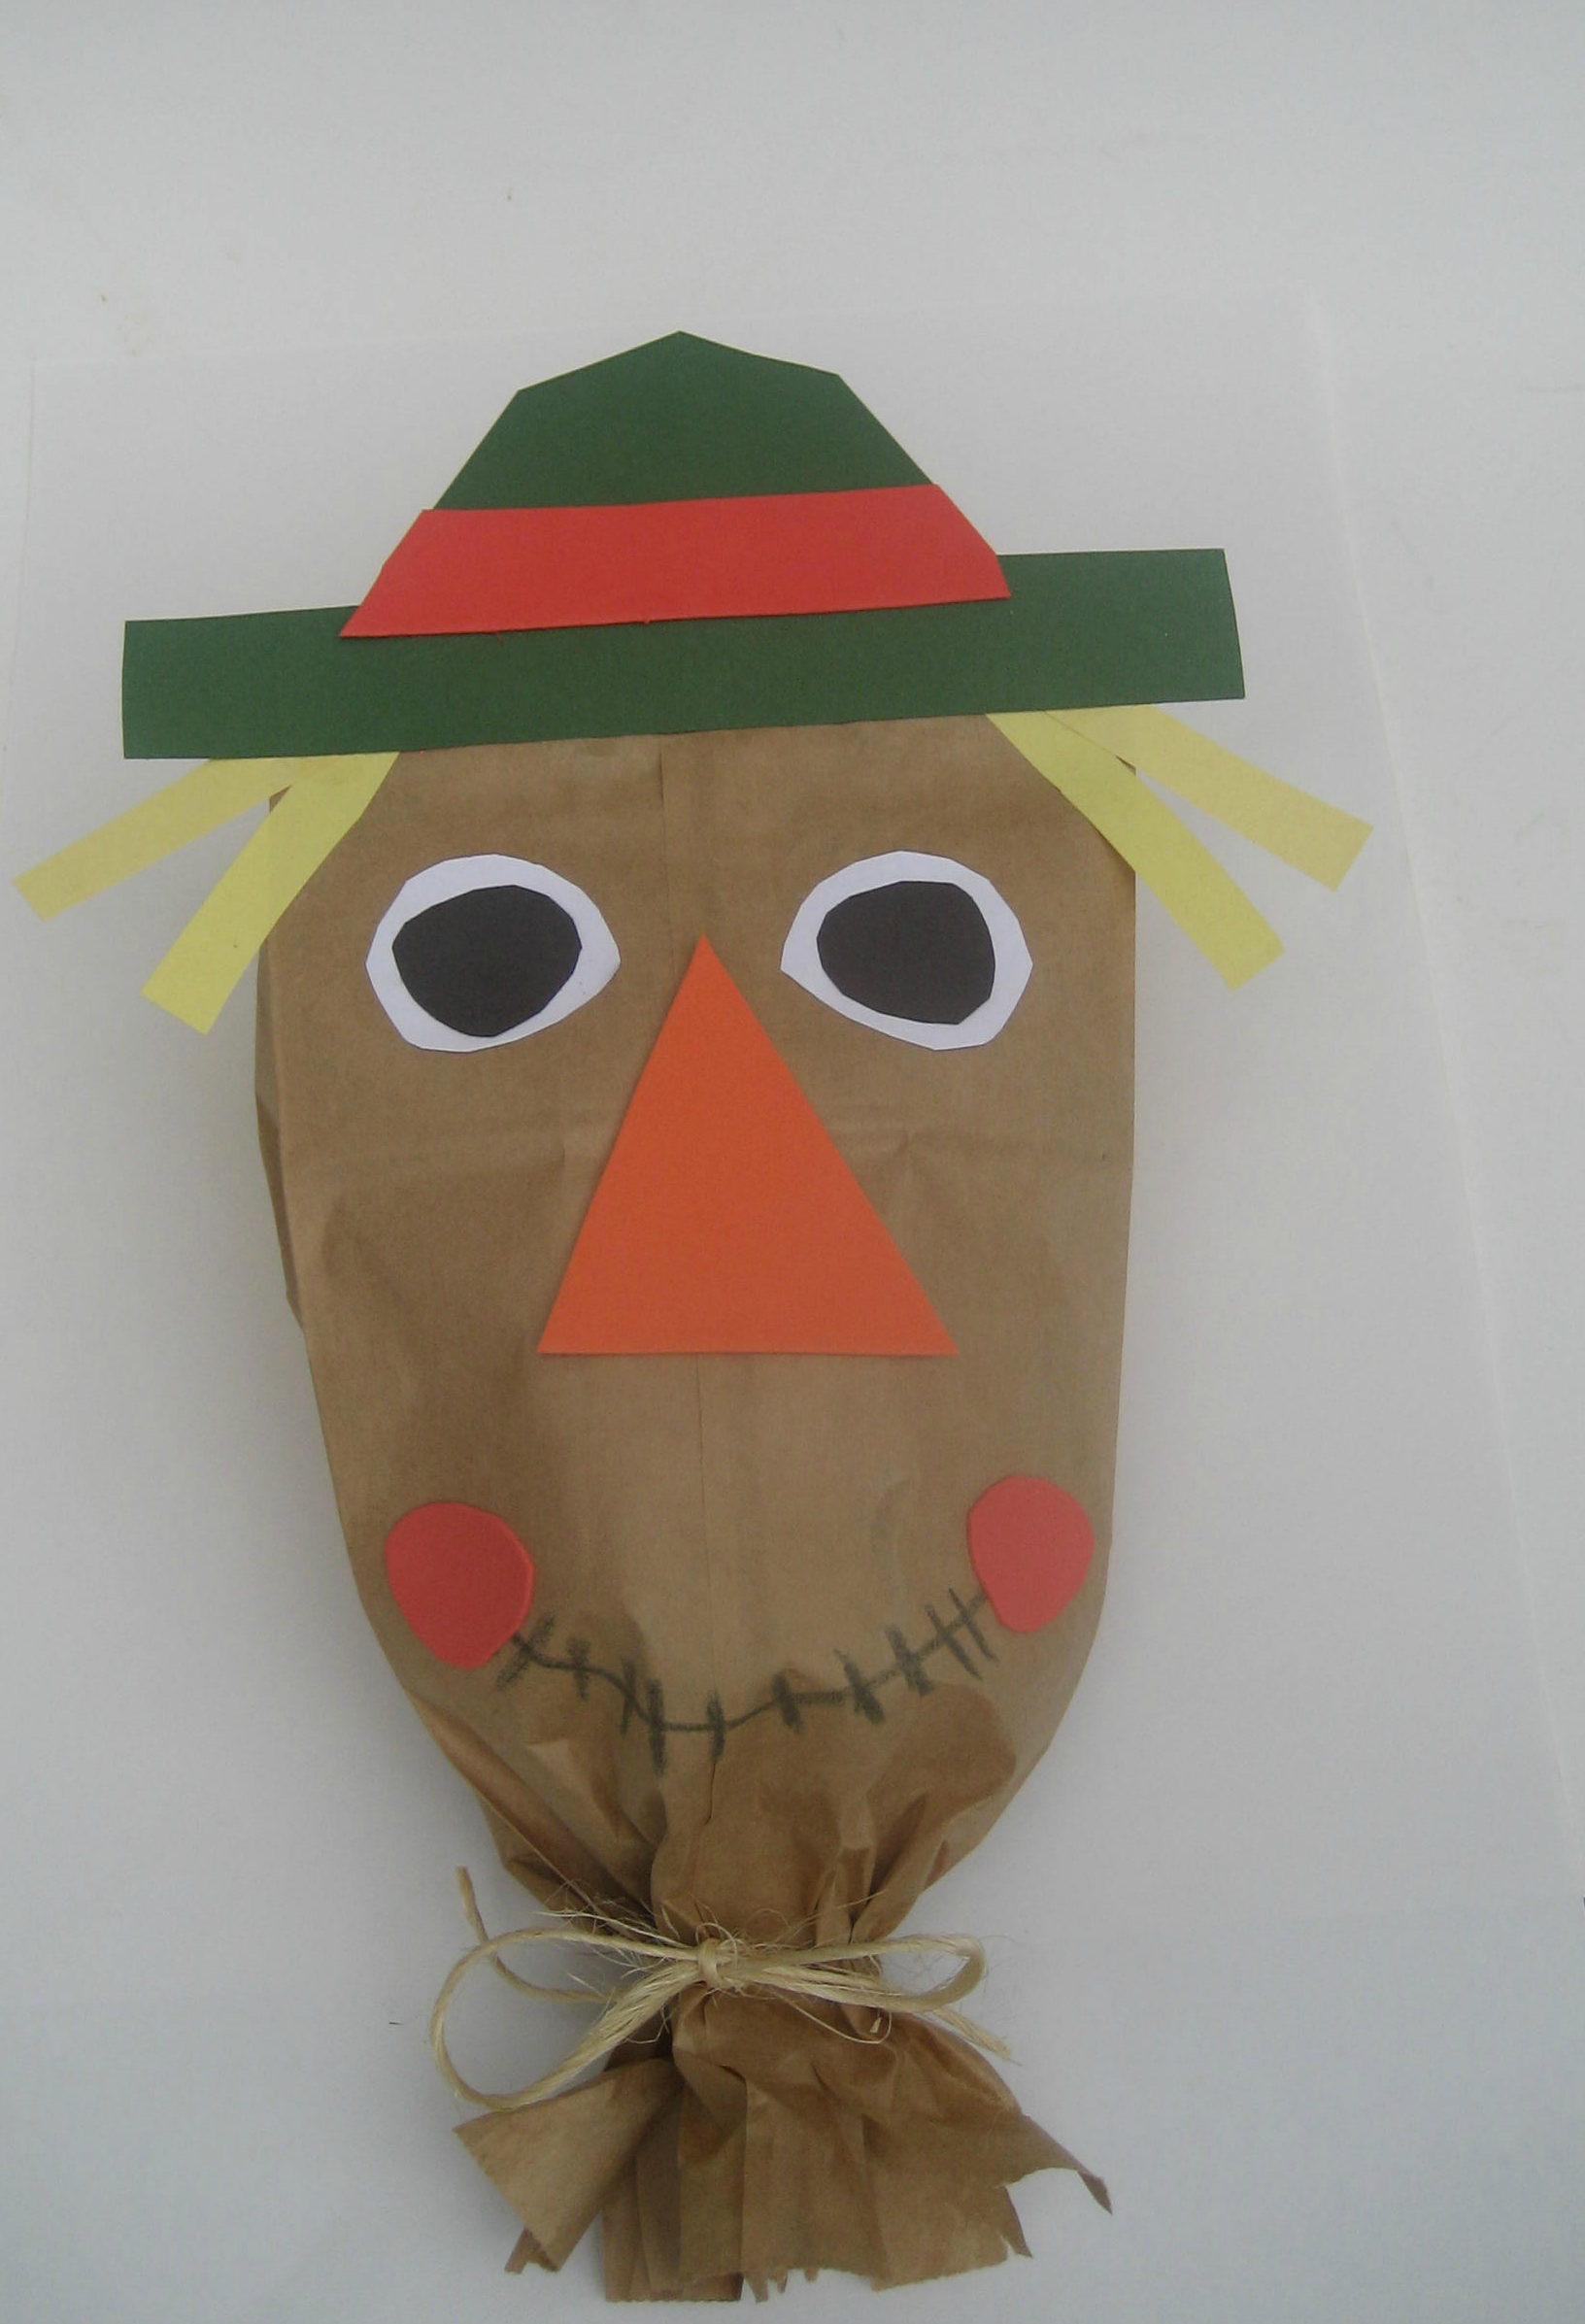 Paper Bag Crafts Your Kids Will Love - Buggy and Buddy